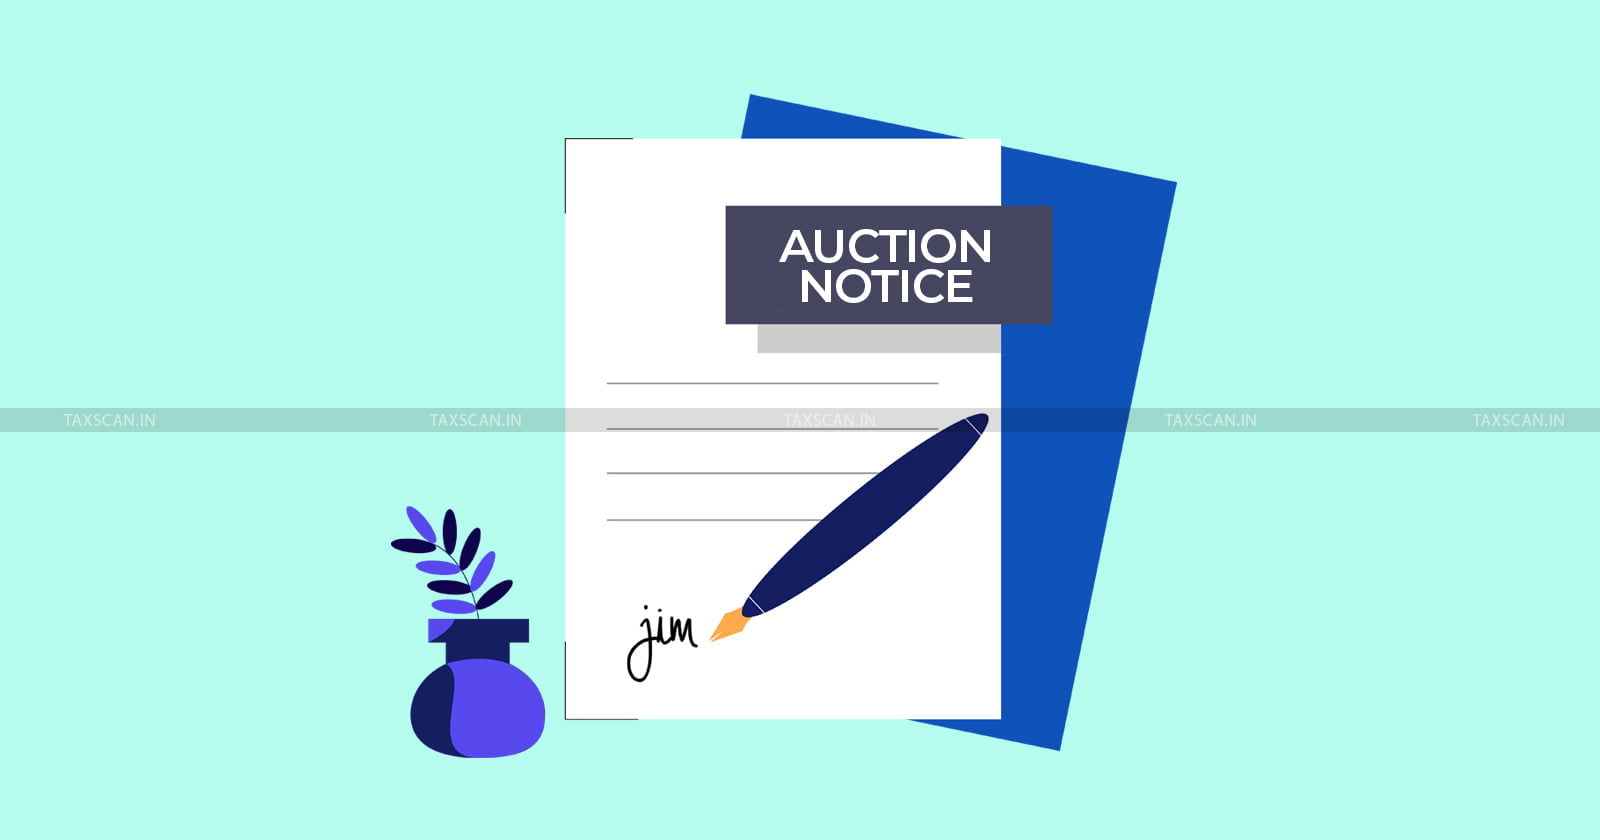 Rectification Petition - Assessment Order - Filing Statutory Appeal - Statutory Appeal - Madras High Court - Auction Notice - Notice - taxscan